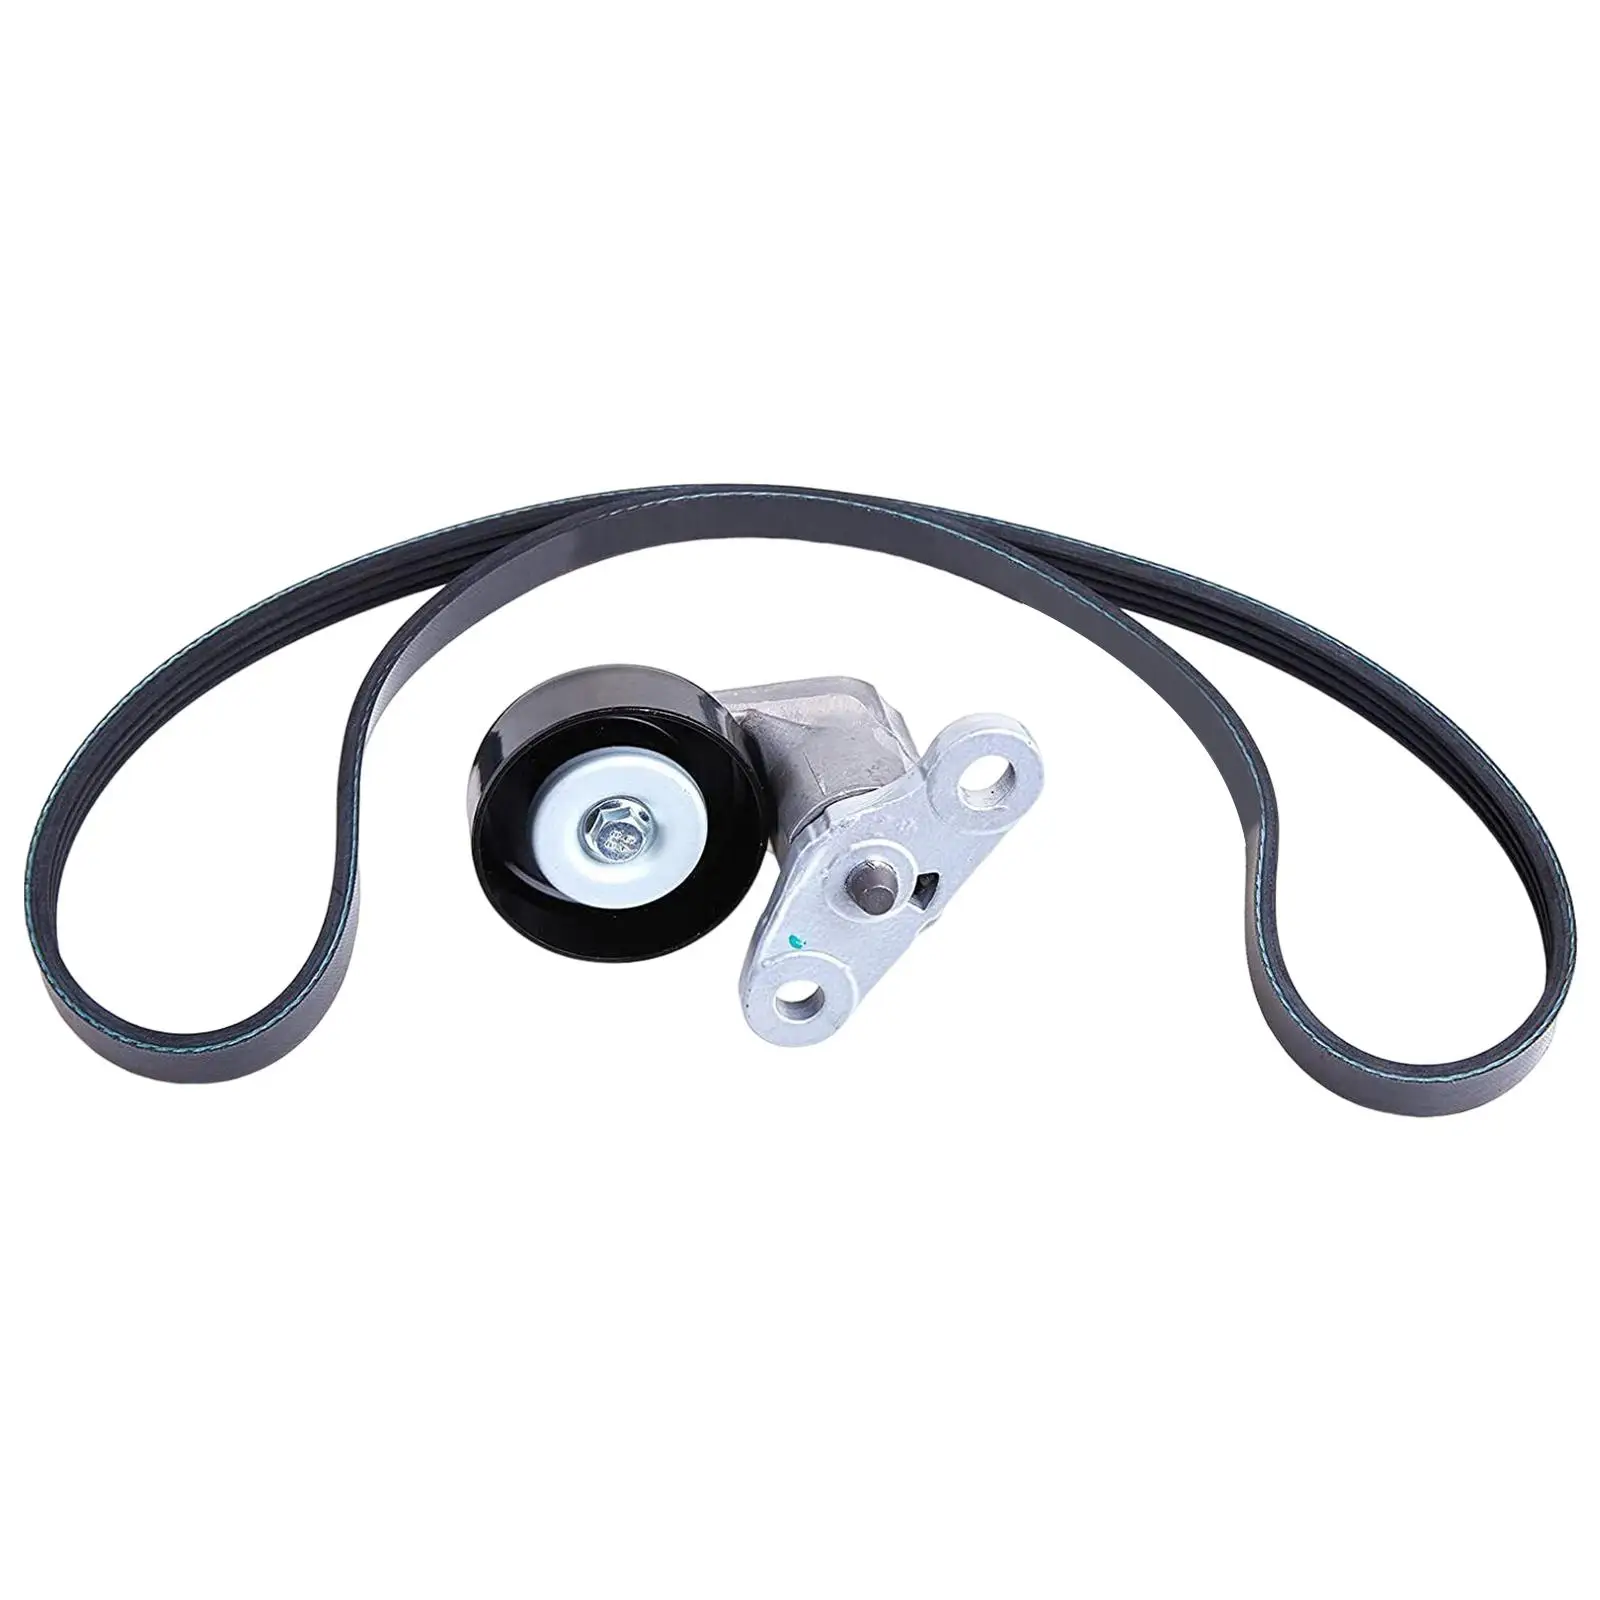 Serpentine Drive Belt Tensioner Kit for Chevrolet Express 1500 2500 3500 Accessories Easily to Install Durable